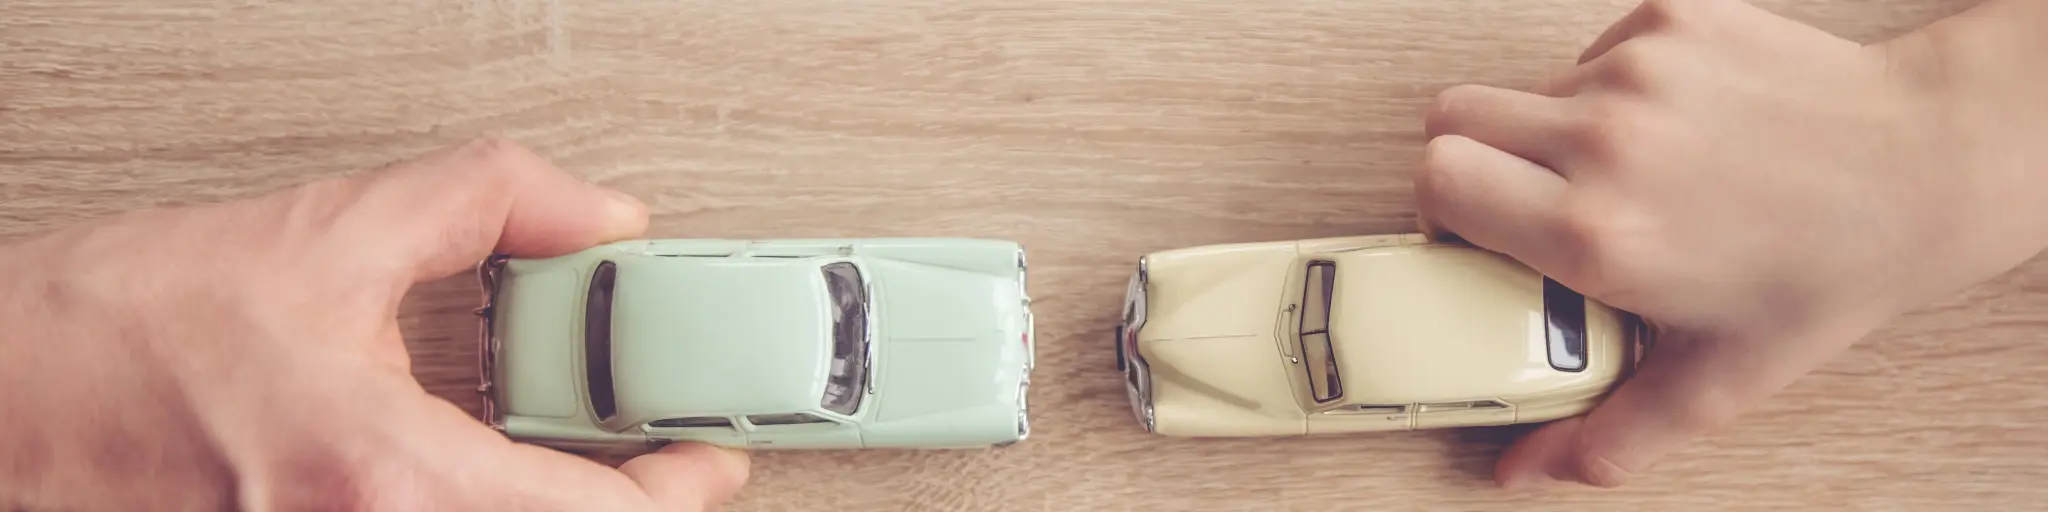 Top down view of a dad and son's hands playing toy cars